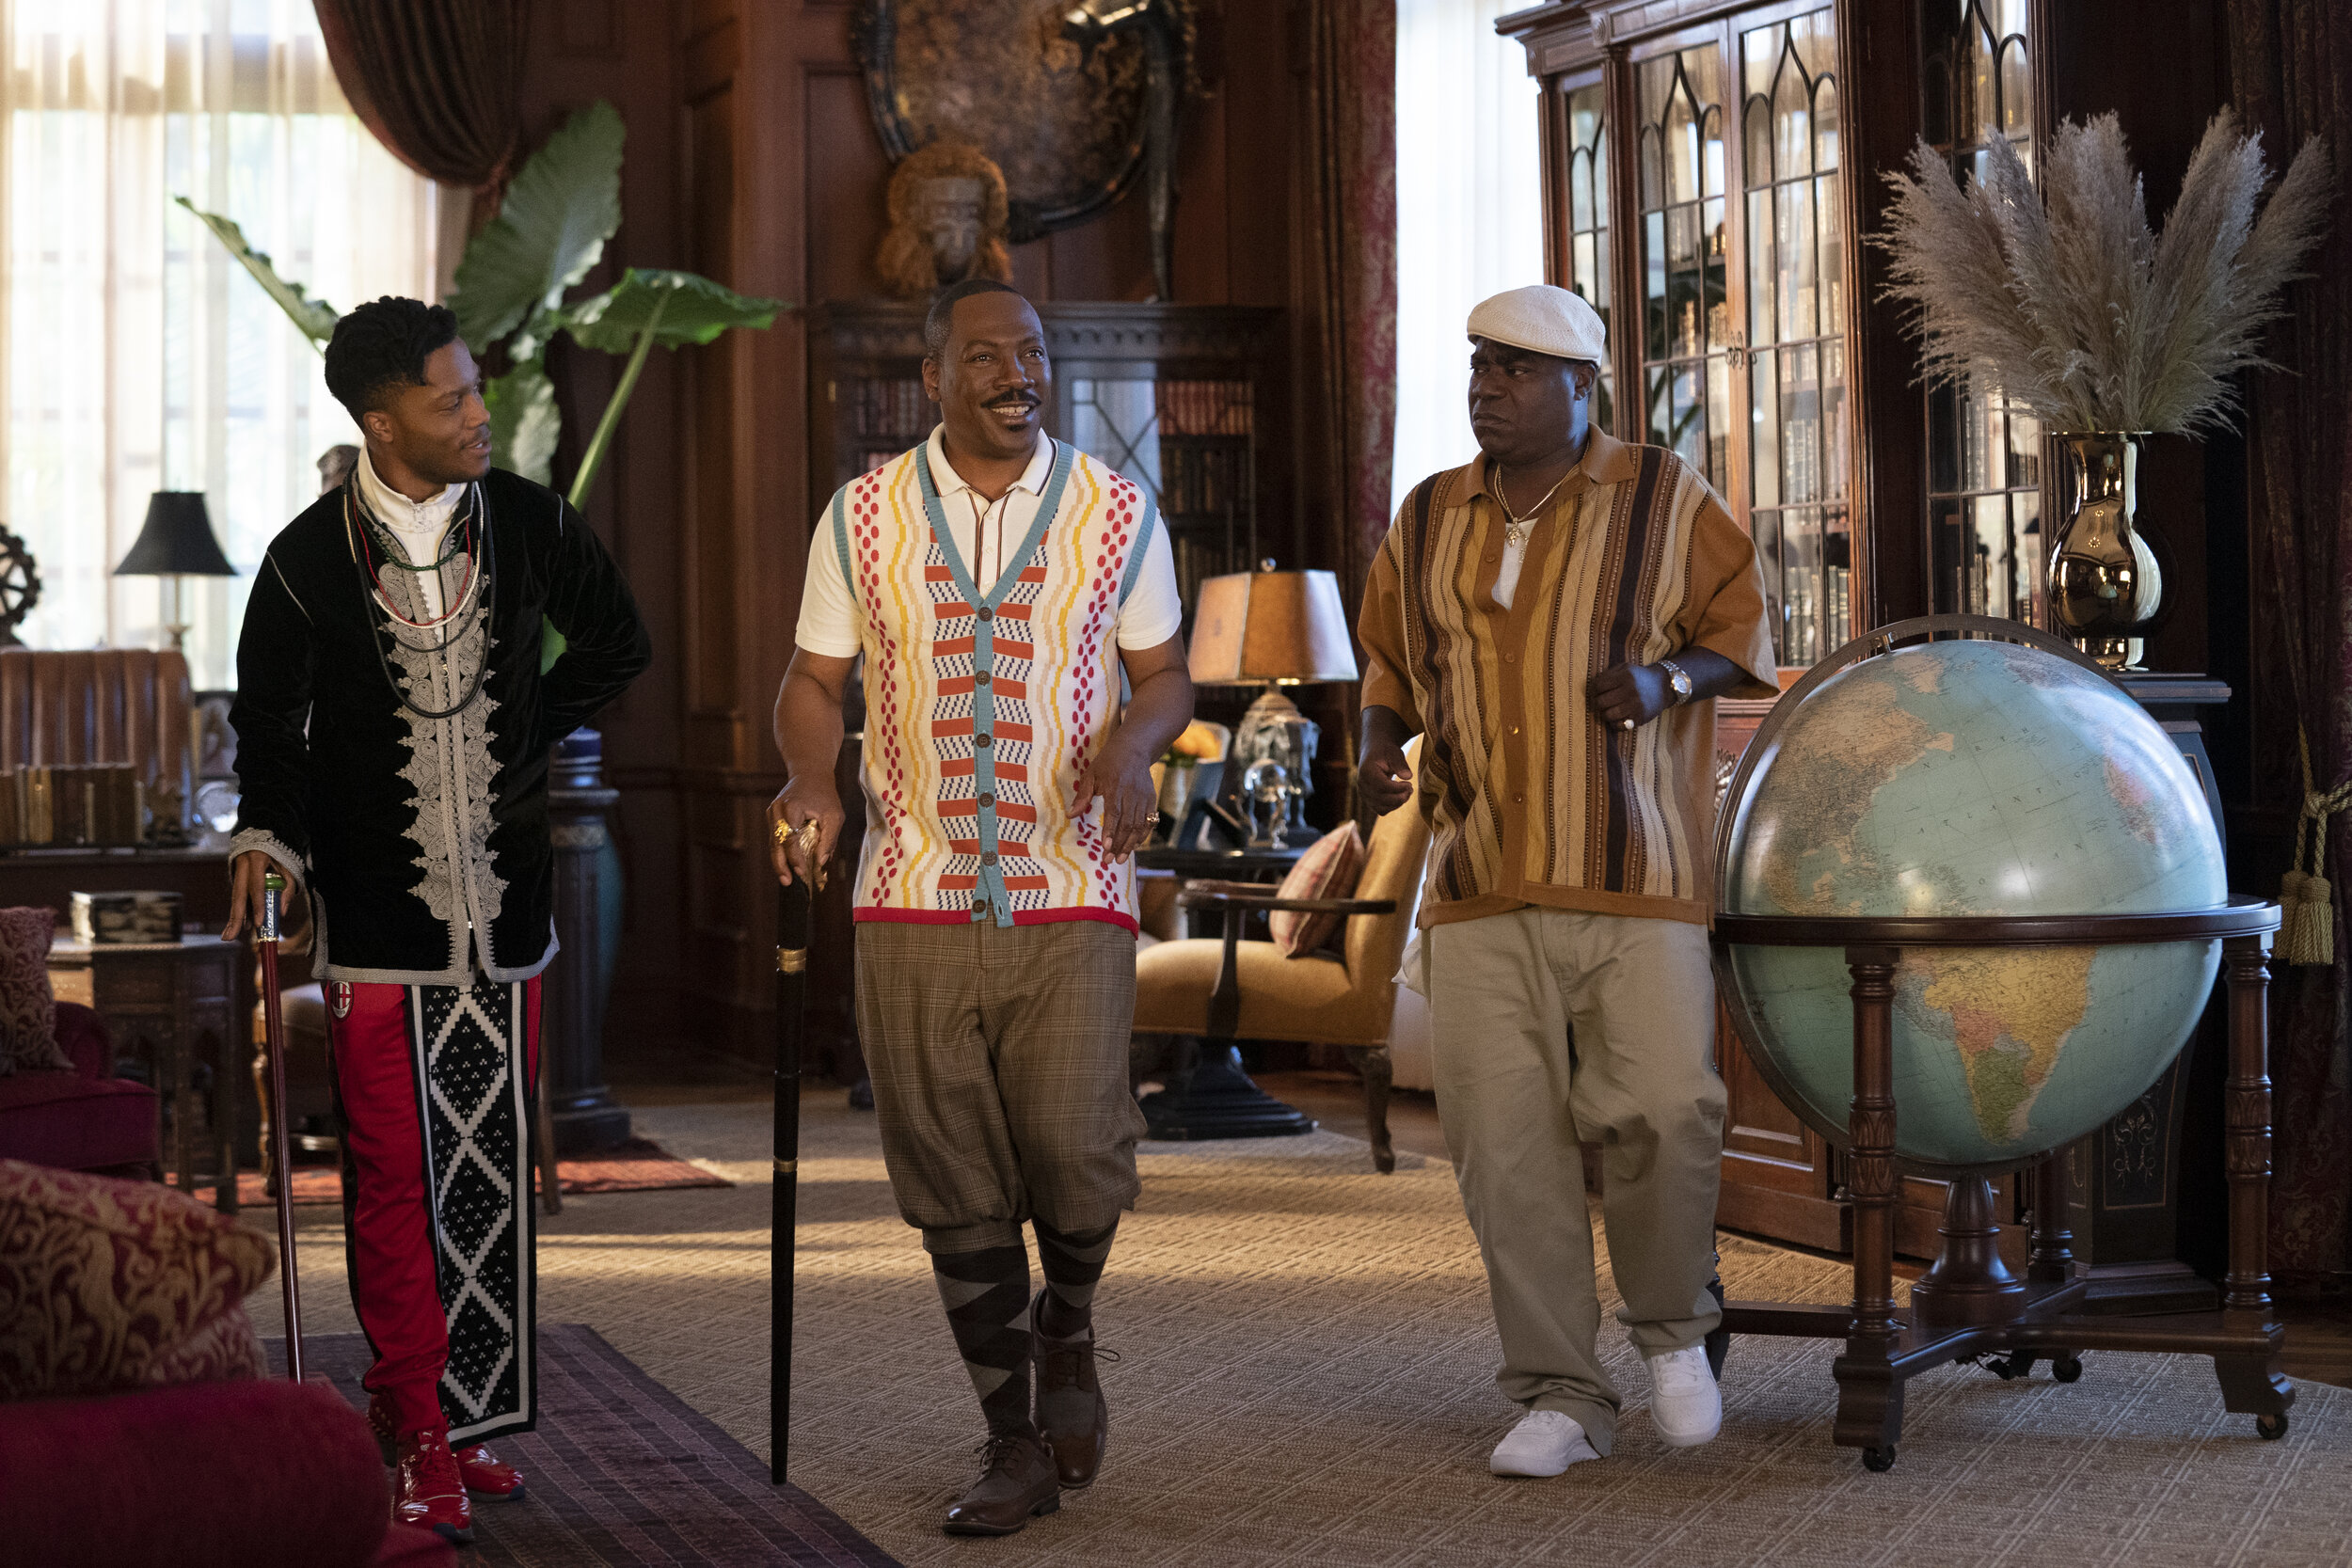  Jermaine Fowler, Eddie Murphy and Tracy Morgan star in COMING 2 AMERICA Photo: Quantrell D. Colbert© 2020 Paramount Pictures 